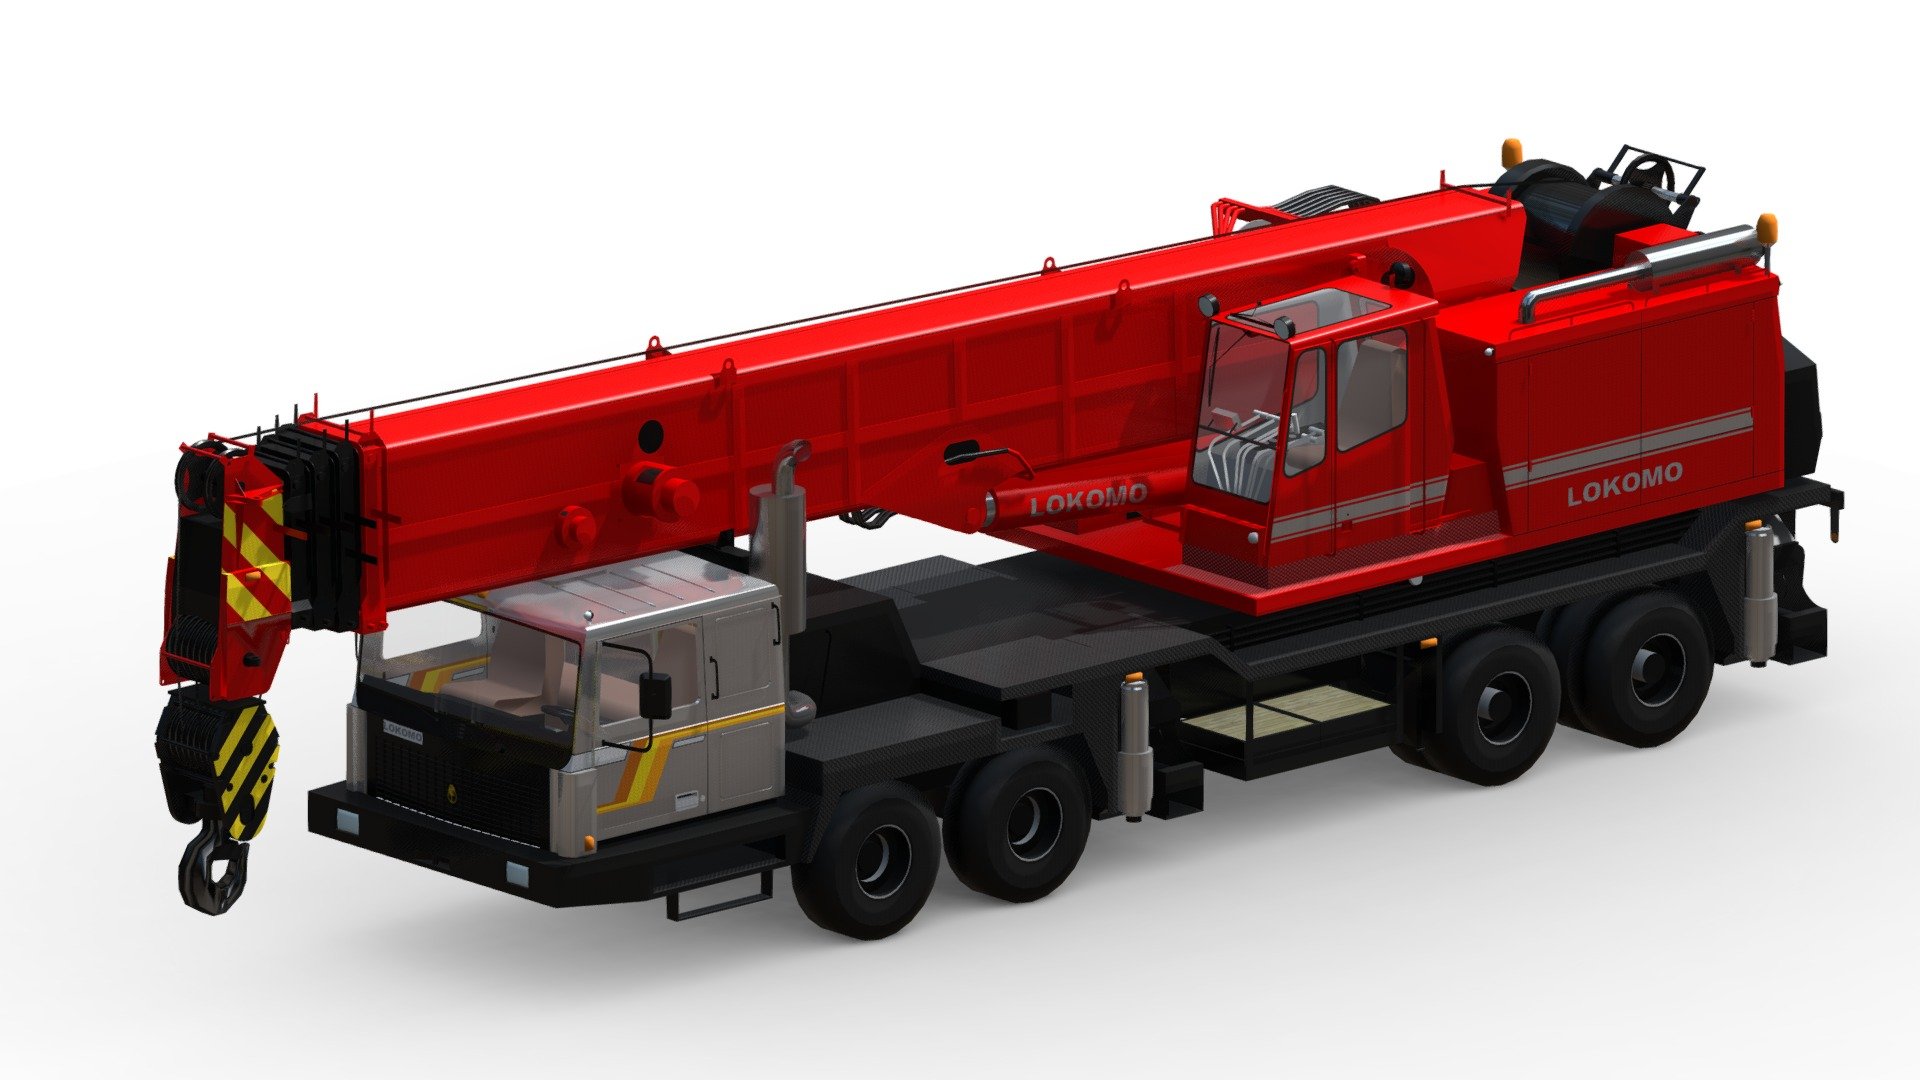 This 3D model shows a mobile crane, perfect for construction visualizations and other heavy machinery projects. It has been carefully designed to maintain the details and proportions of a real mobile crane 3d model